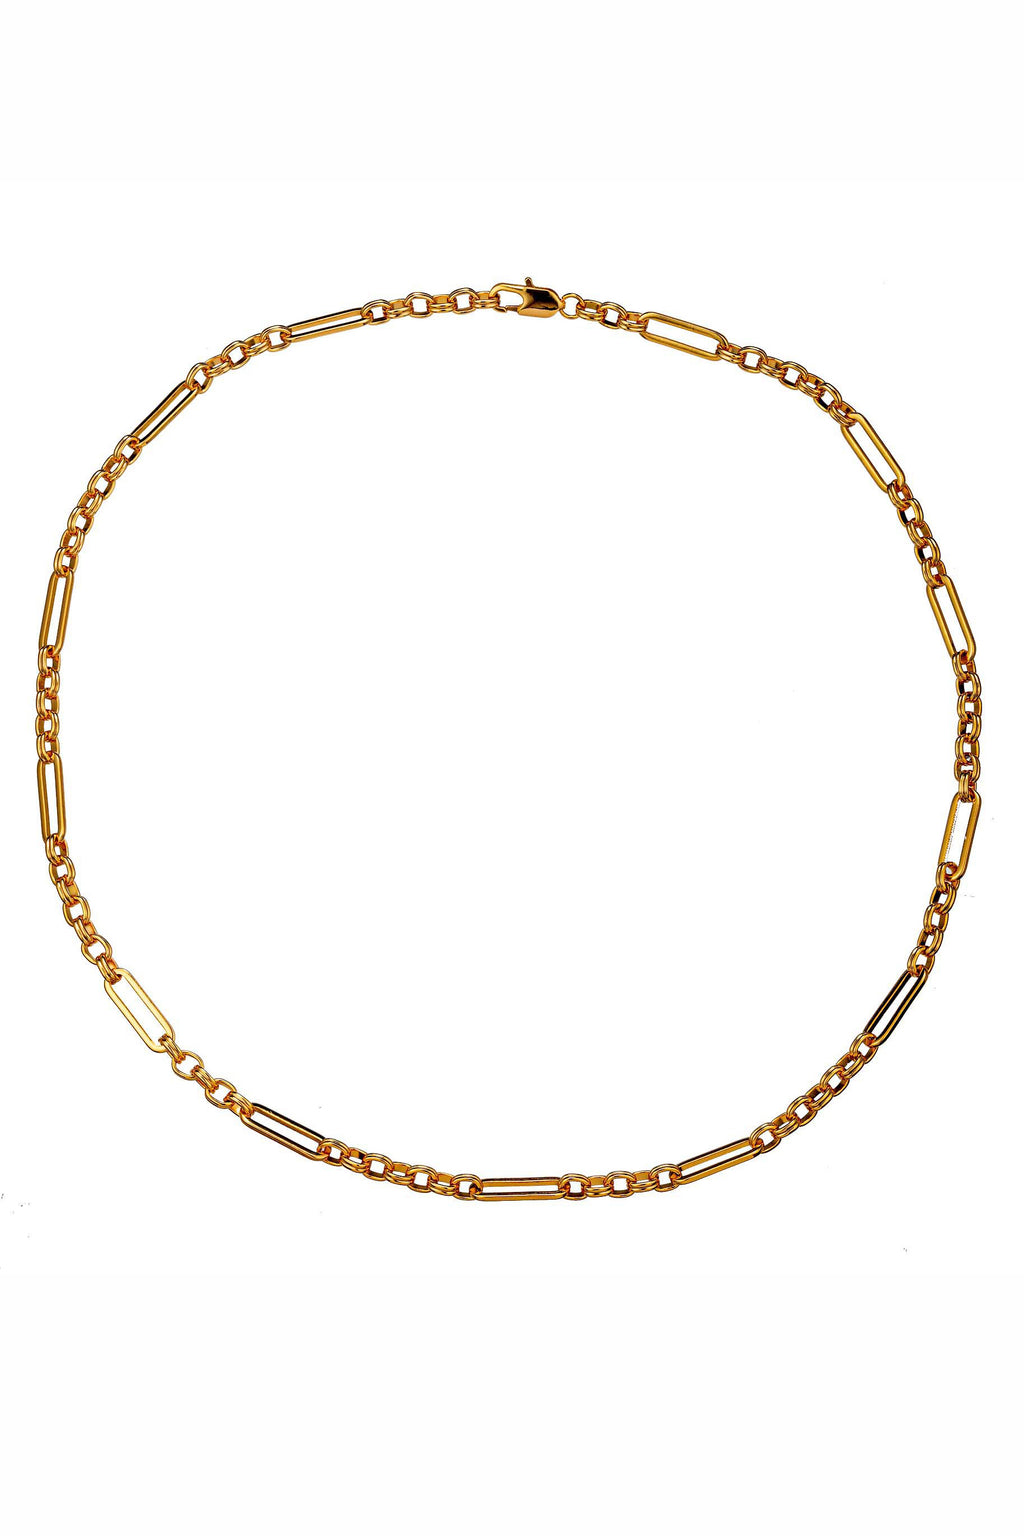 Gold tone brass two style chain link necklace.